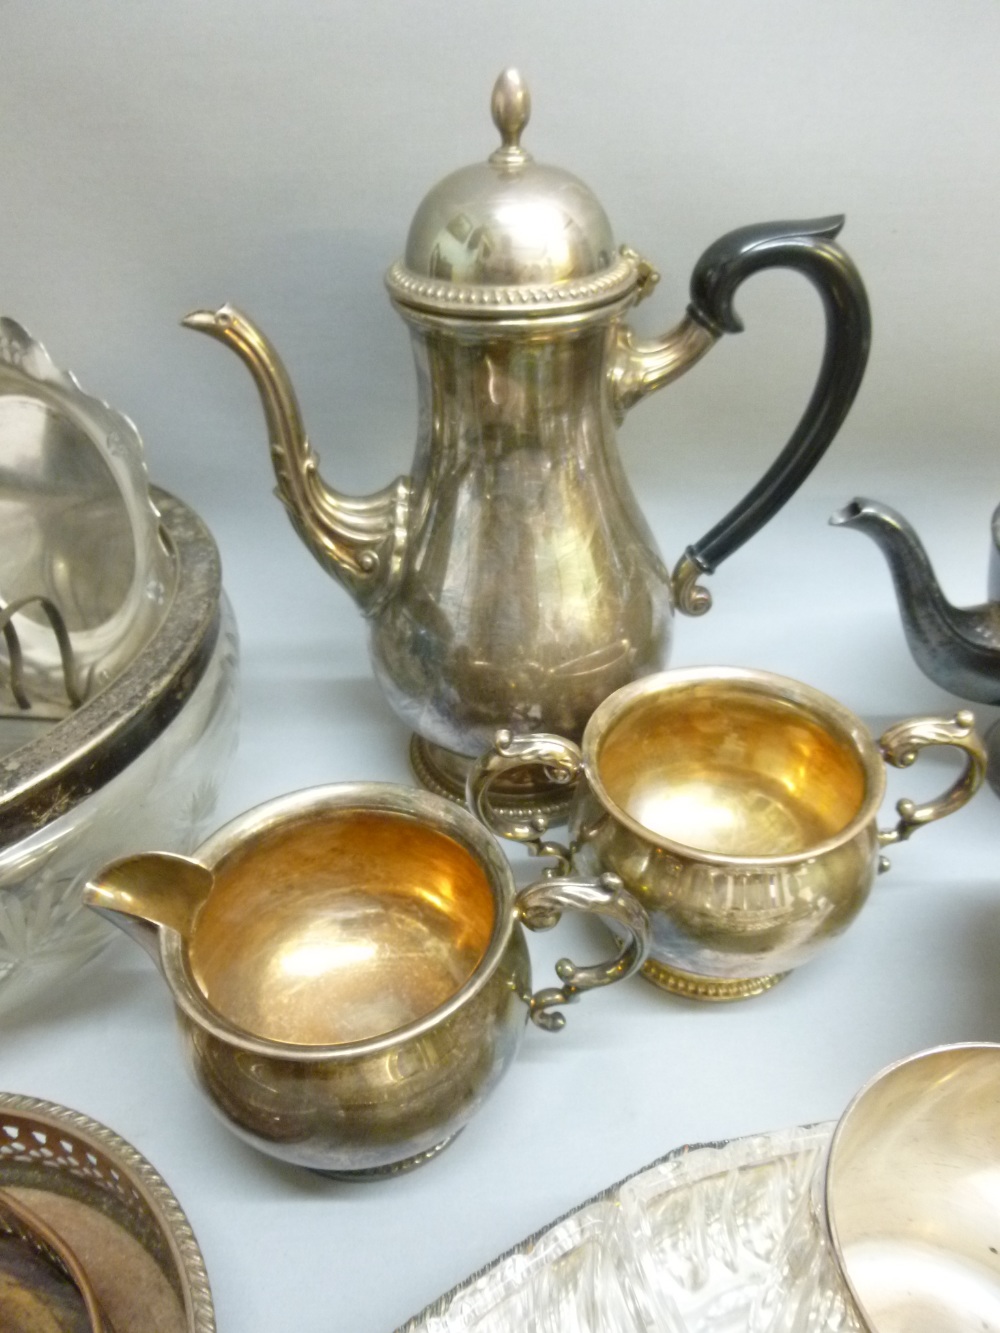 A MAPPIN & WEBB SILVER PLATED COFFEE POT (H: 24.5 cm), SUGAR BOWL AND MILK JUG TOGETHER WITH A